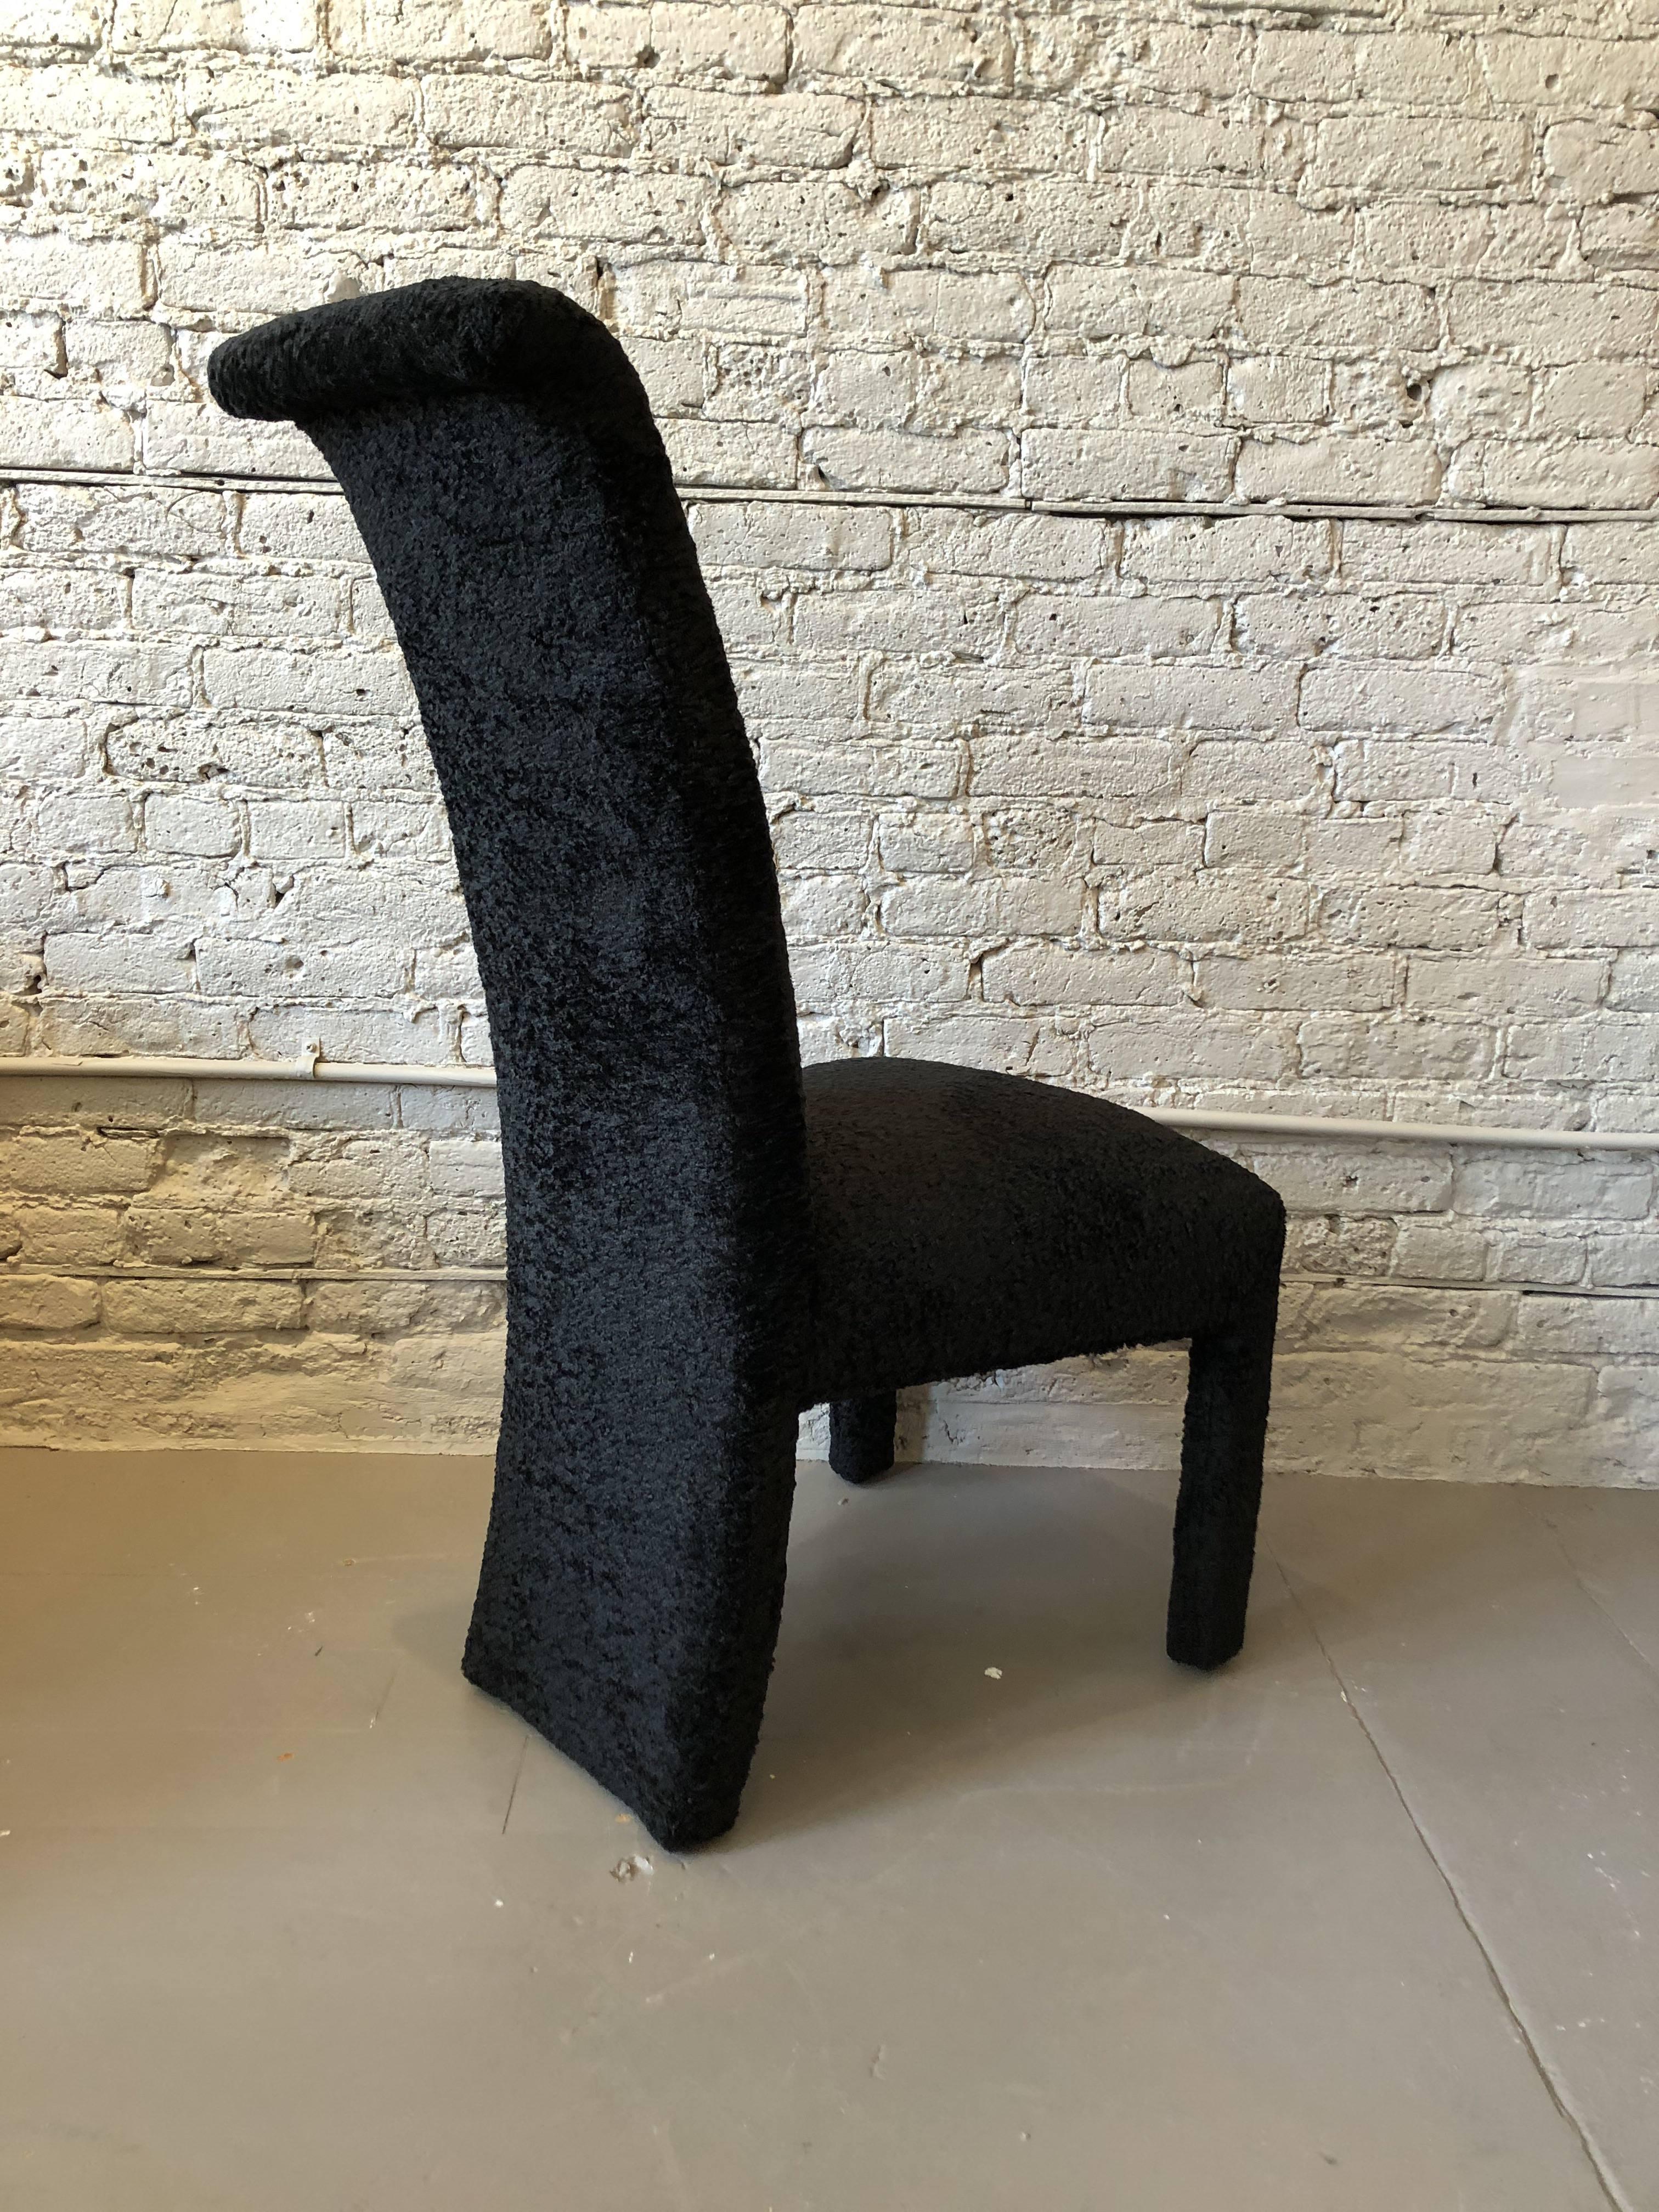 Fully restored postmodern dining chairs. Curl up in the softest and most plush fabric, faux fur Persian lamb! The fabric also cleans very well so don’t worry about spills/messes with these.

Dimensions: 21